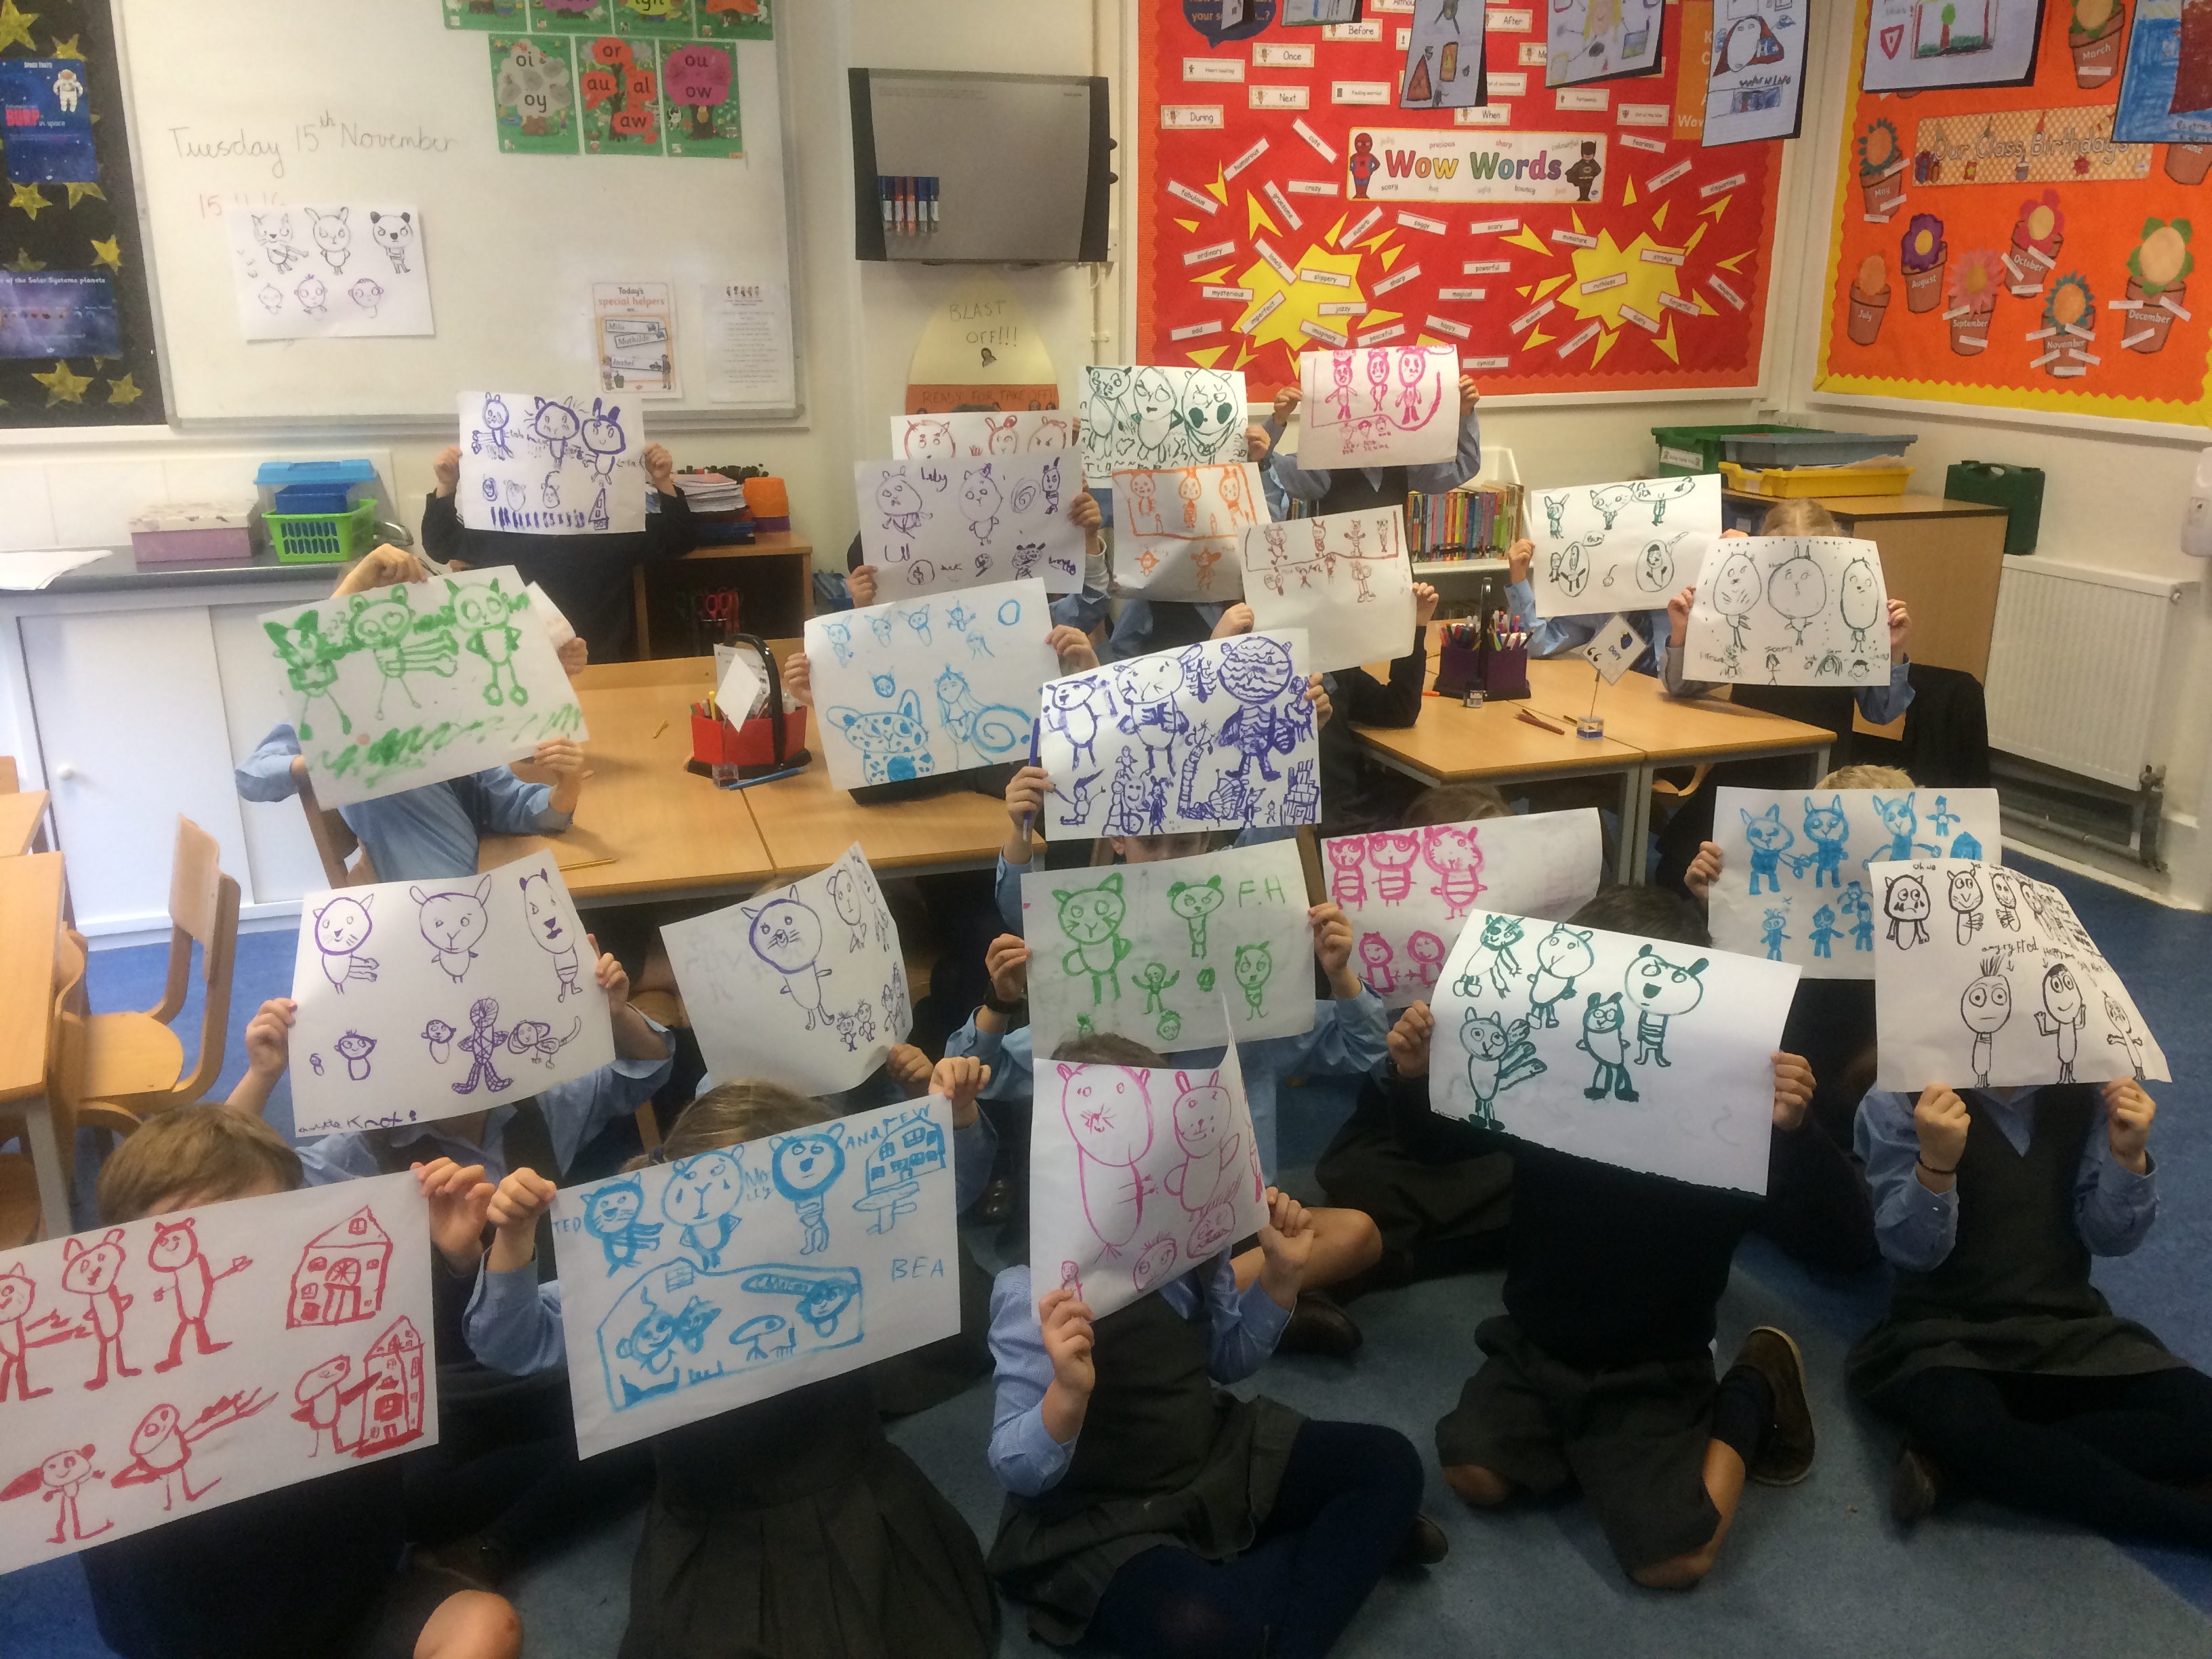 Children in a classroom holding up picture of the characters they have drawn